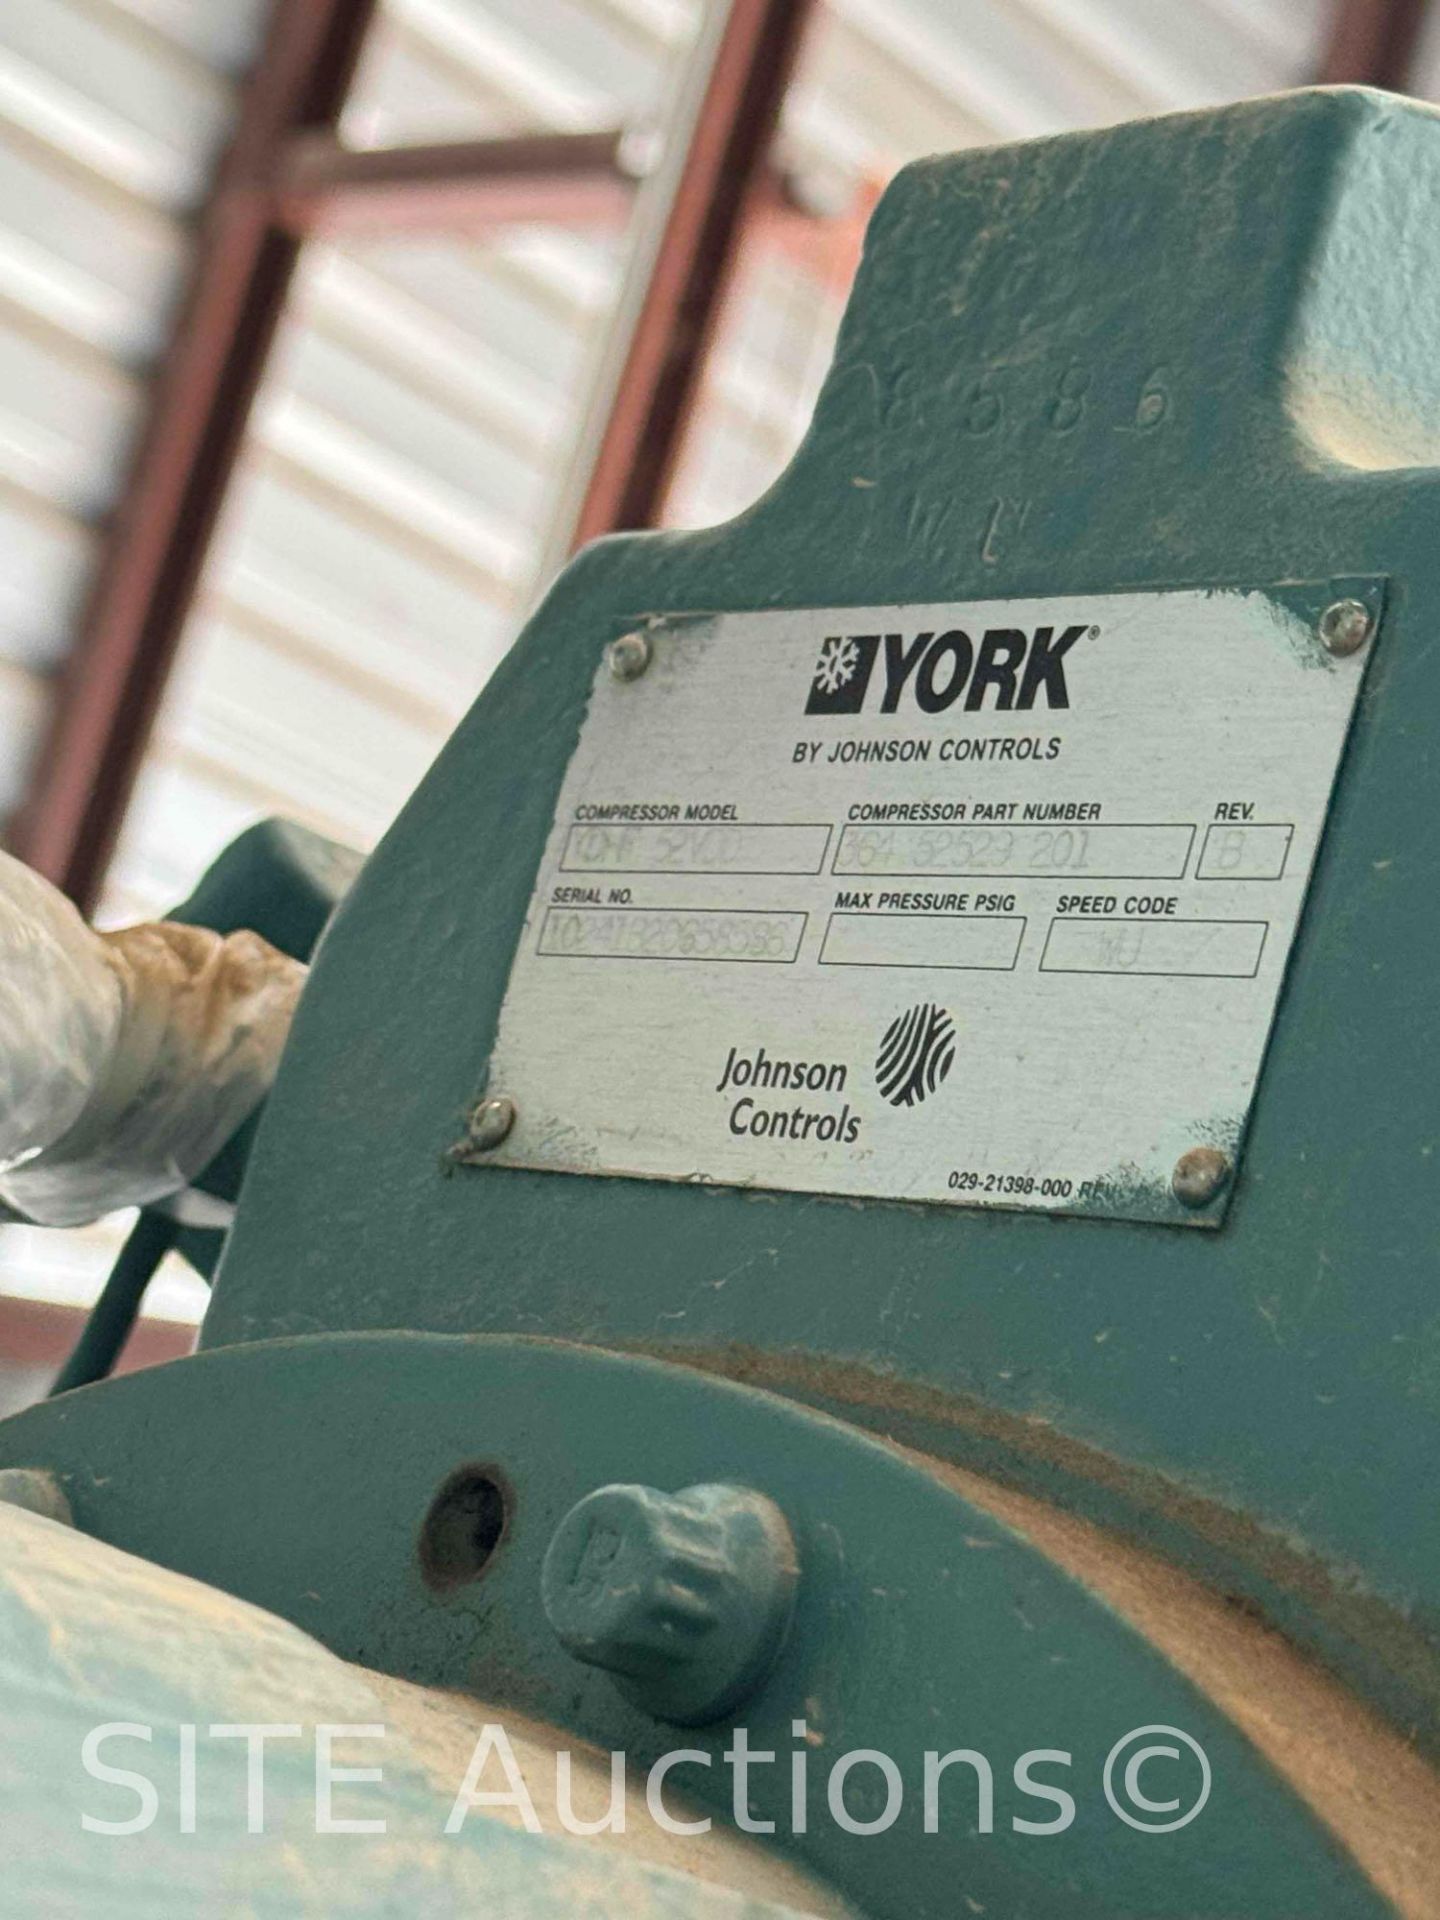 UNUSED 2012 York by Johnson Controls MaxE Centrifugal Chiller - Image 11 of 15